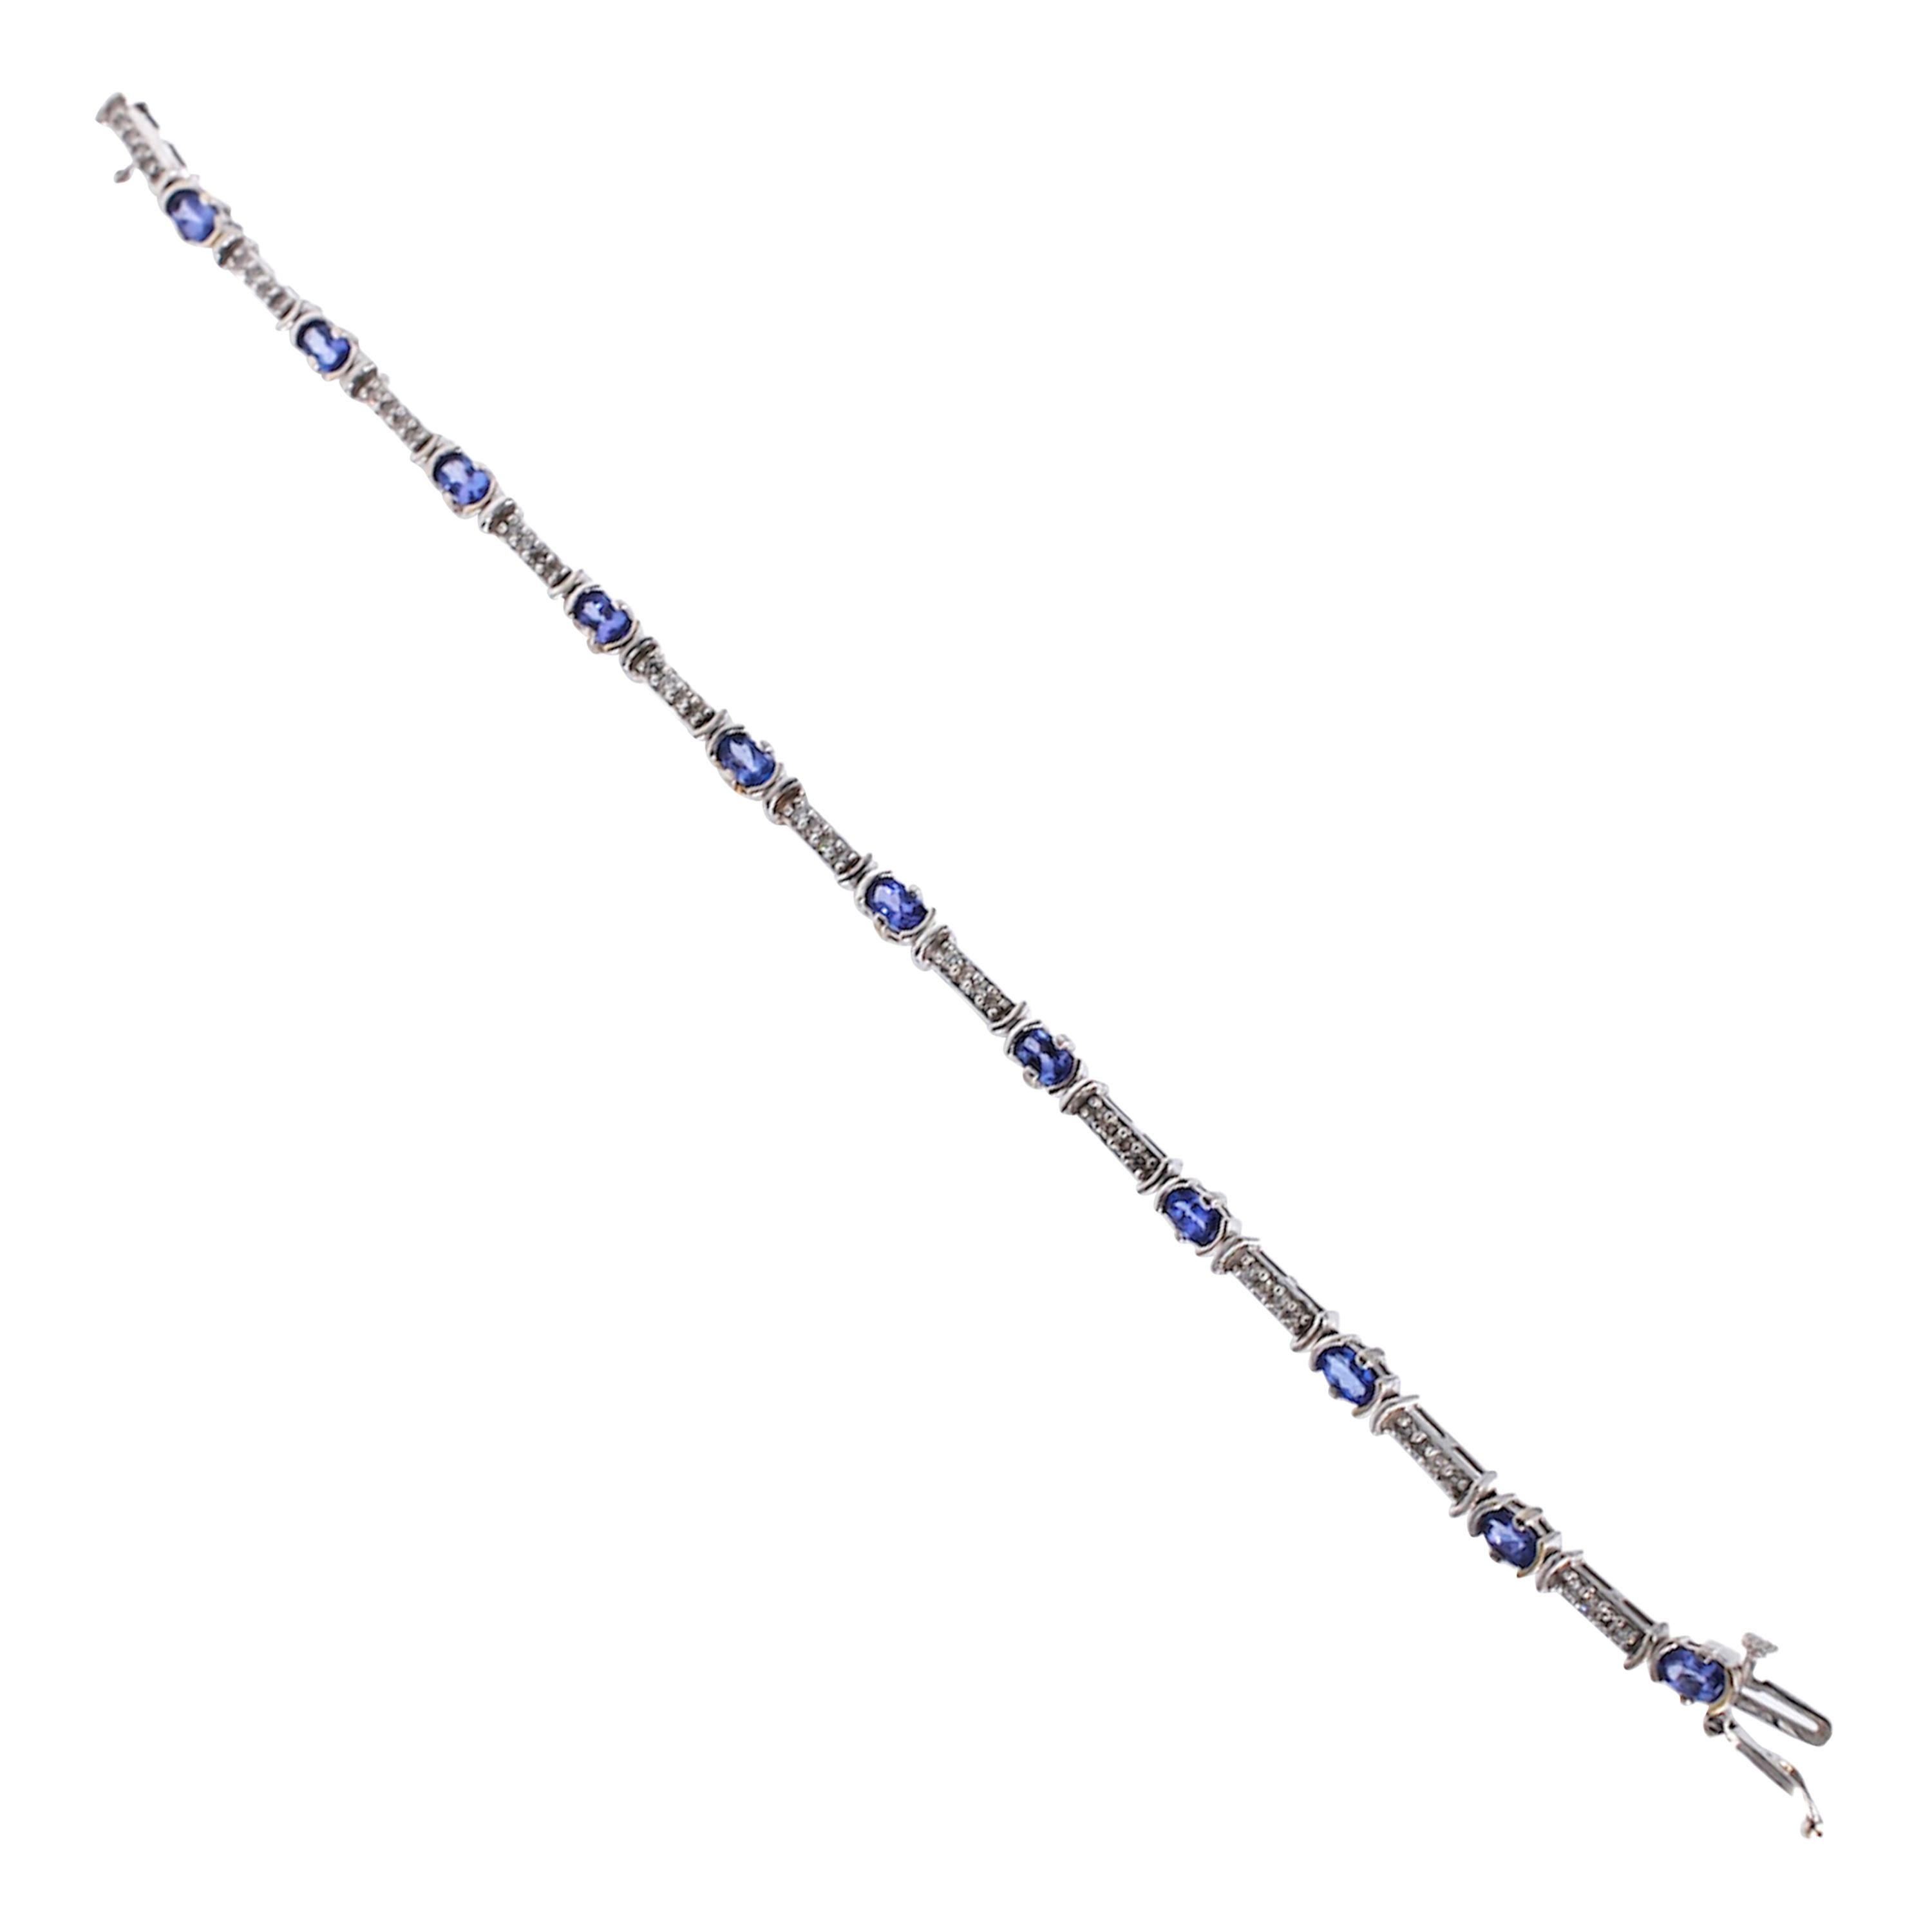 Diamond and Tanzanite, Tennis 3.33 TCW Bracelet, Tube Set 14 Karat Gold 
7 inches in length tennis bracelet with alternating Tanzanite and diamonds. 
(11) oval shaped Tanzanite measuring 3 x 5 mm each with a total weight of approximately 3.00 carats